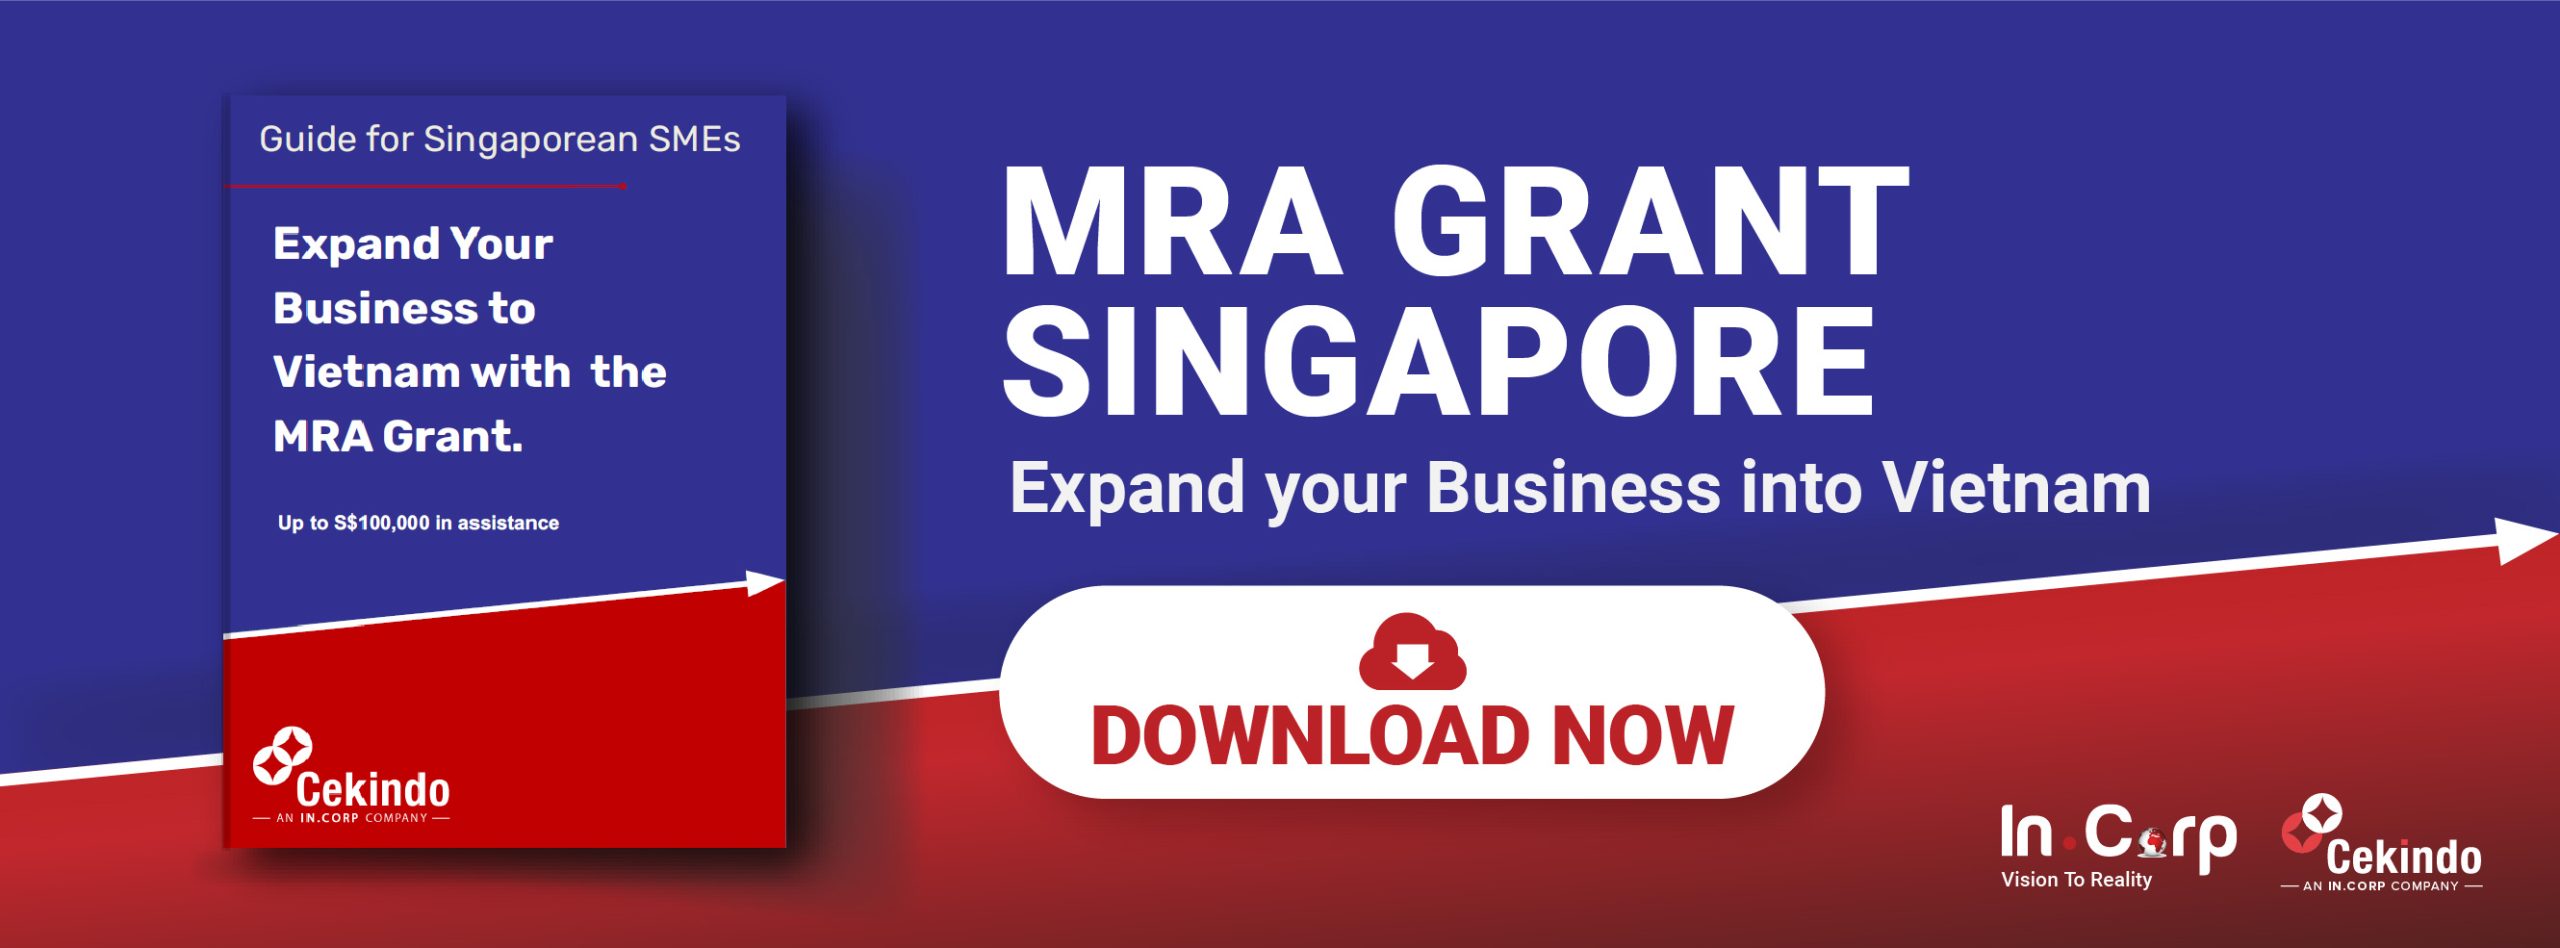 Download the MRA Grant Singapore